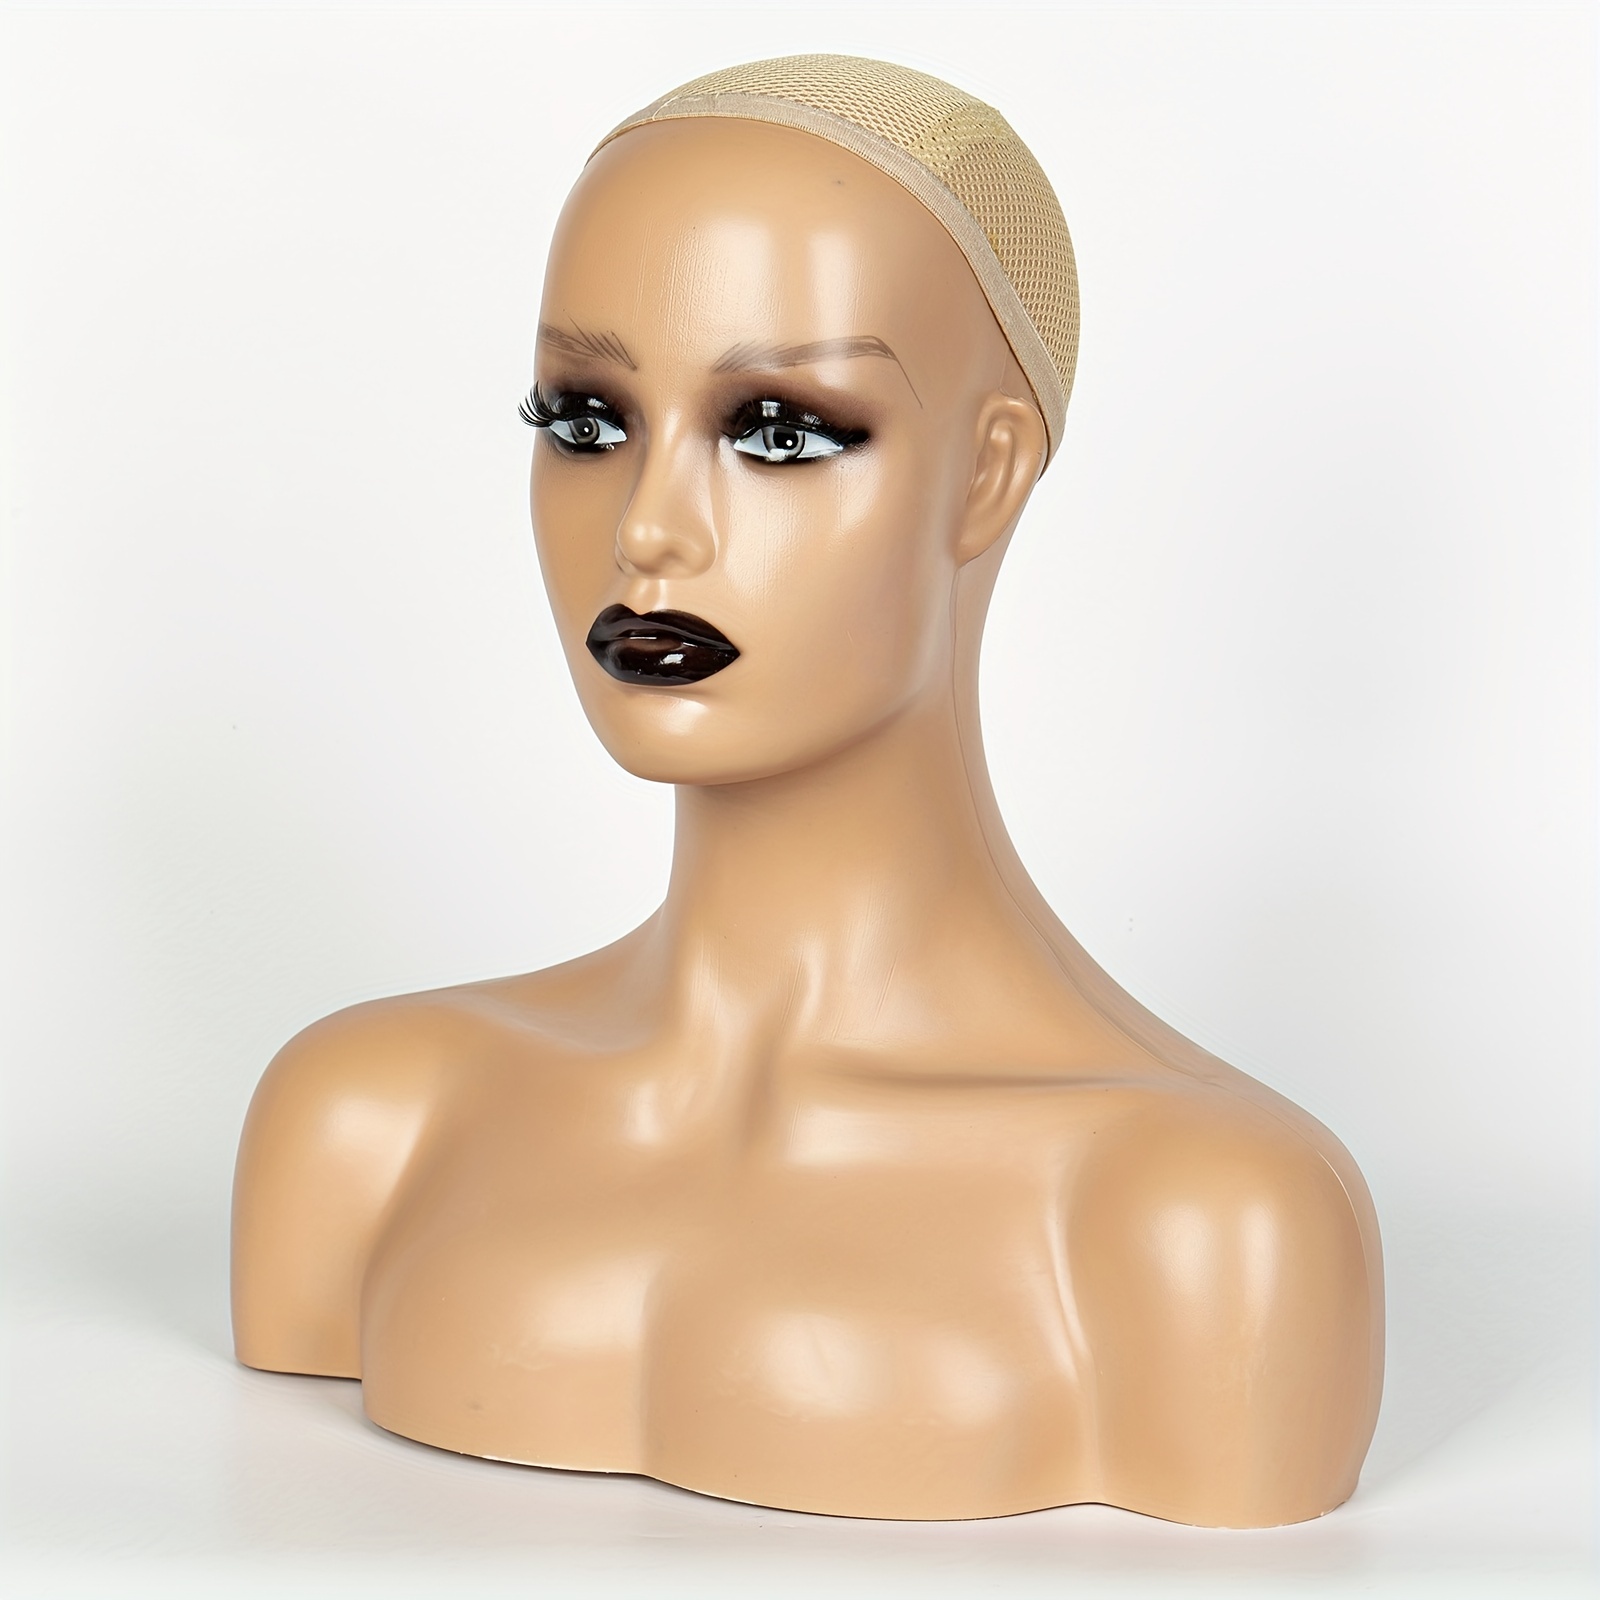 Mannequin Head Model With Shoulder Display Manikin Head Bust For Wigs,Make  Up Display Manikin Head Bust For Wigs Sunglasses Jewelry Hats,Beauty  Accessories Displaying